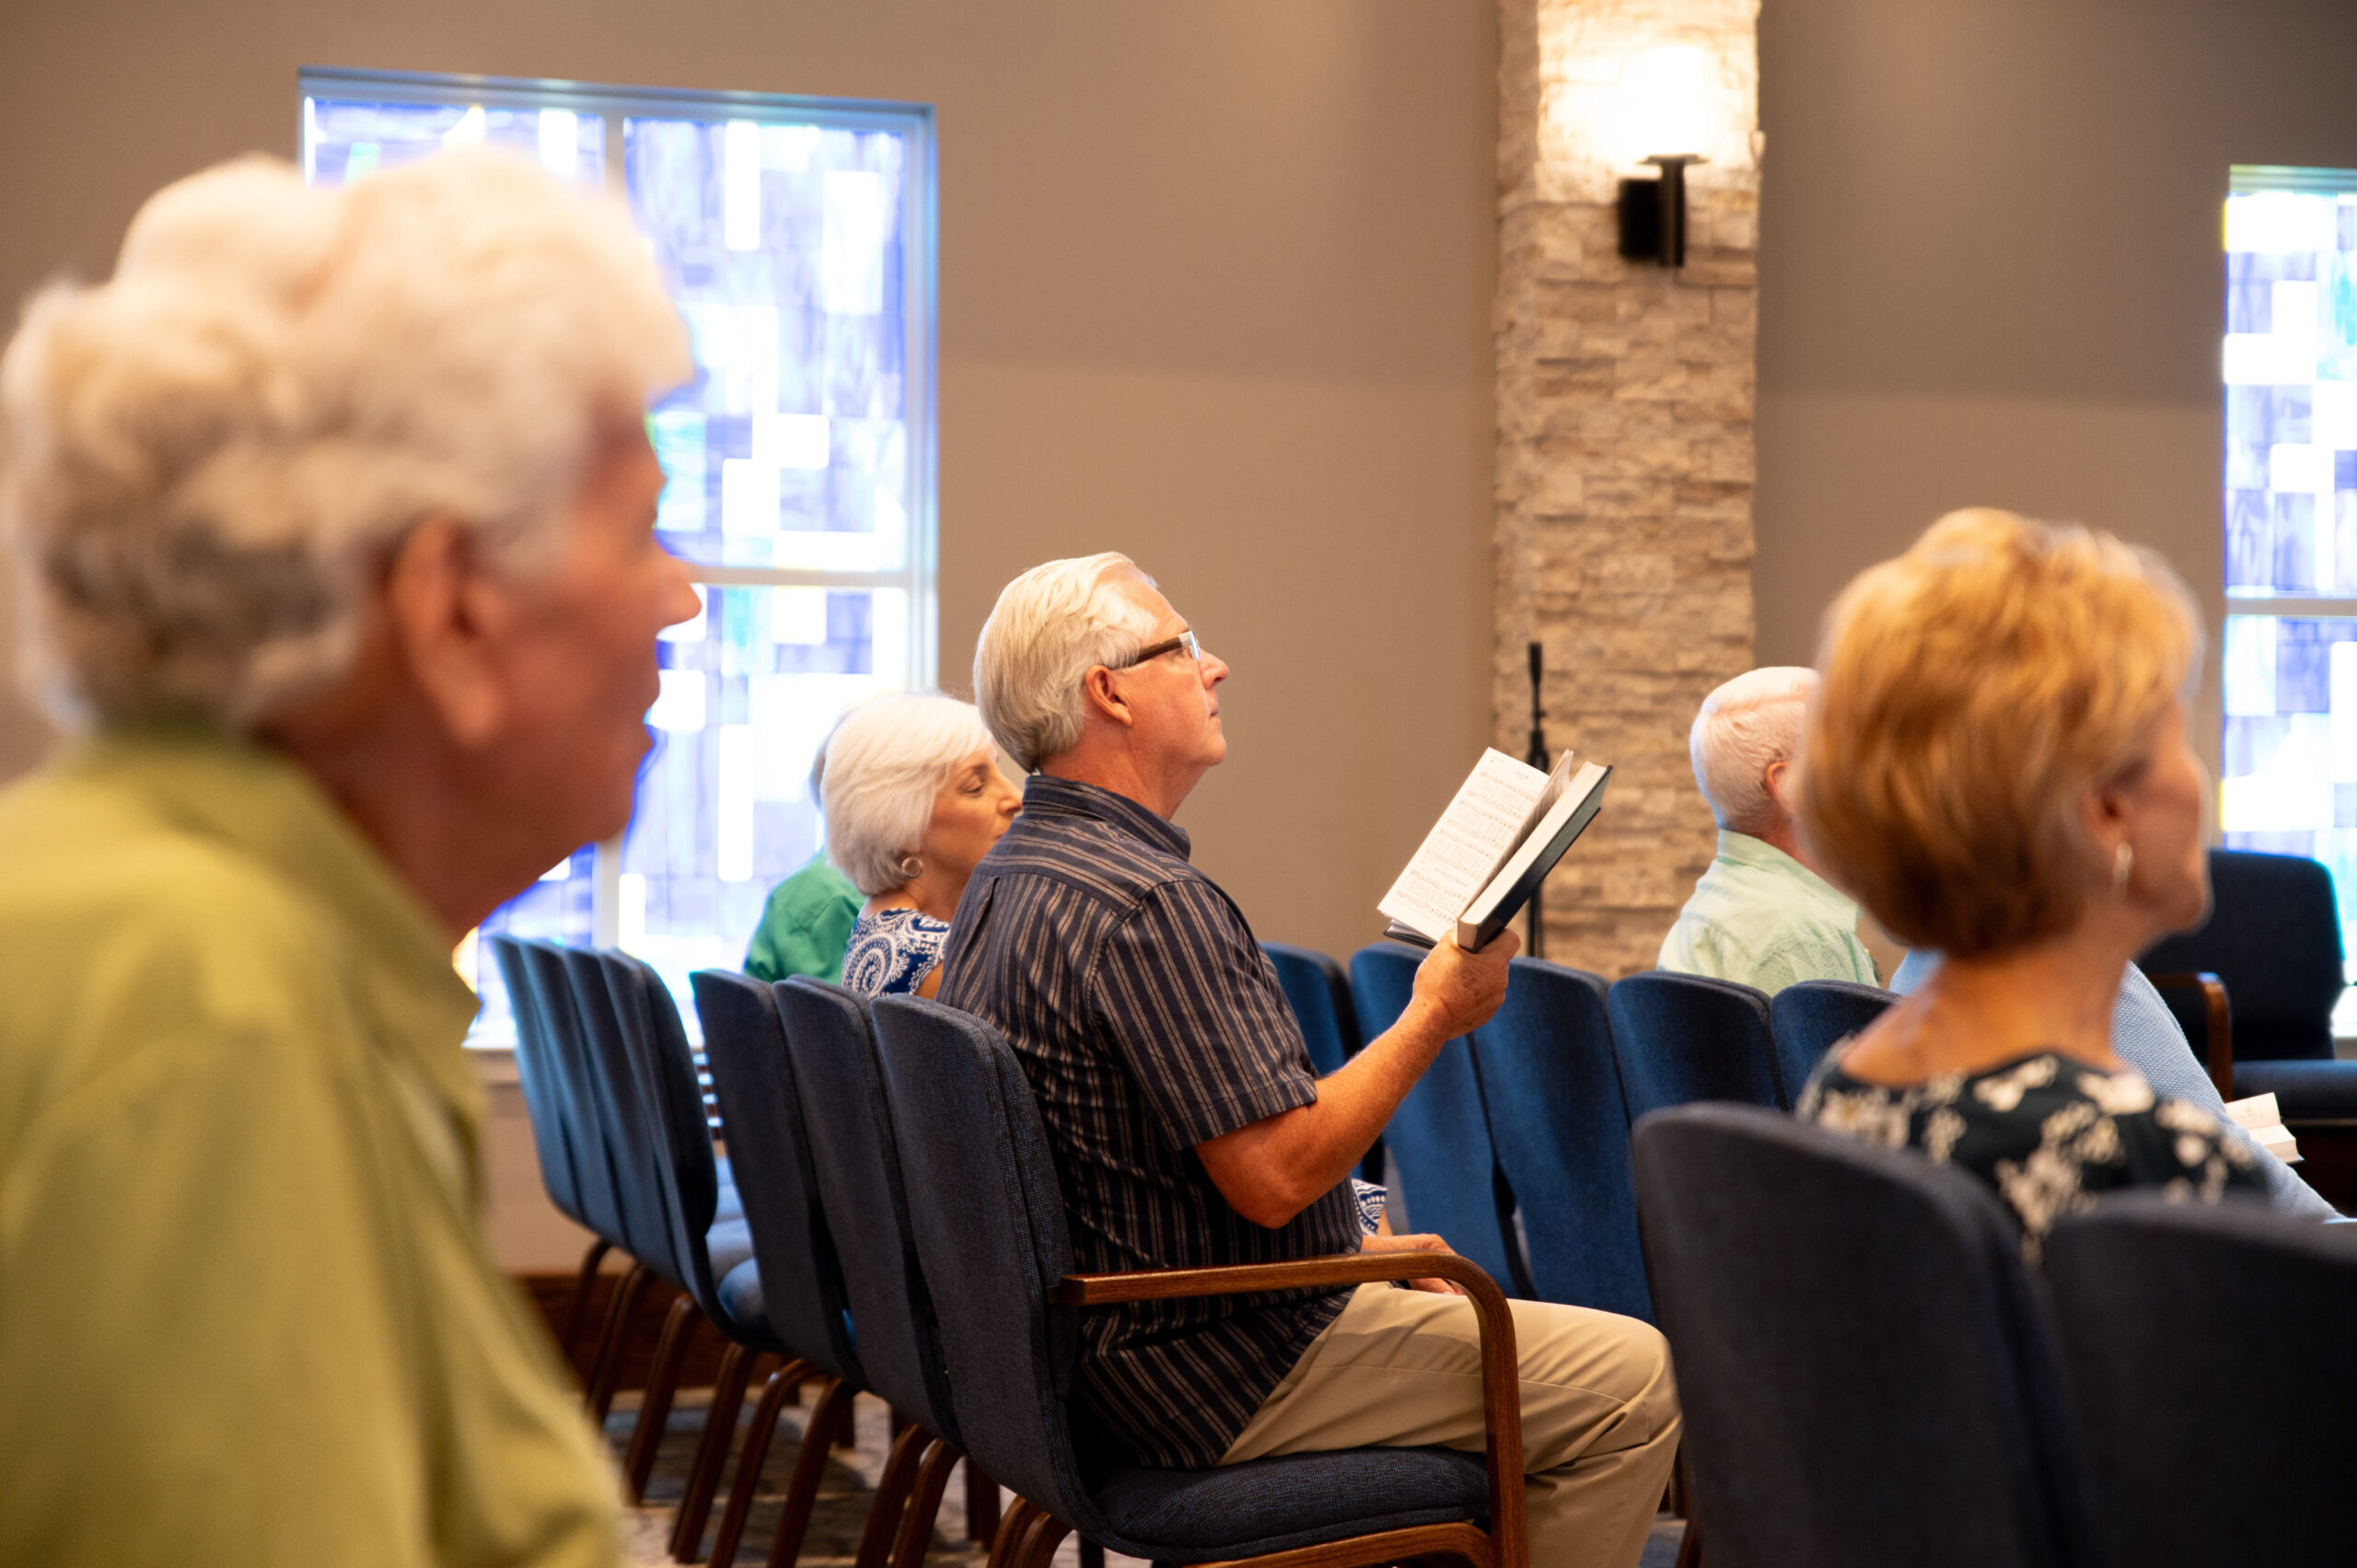 A group singing hymns at a service in the chapel.